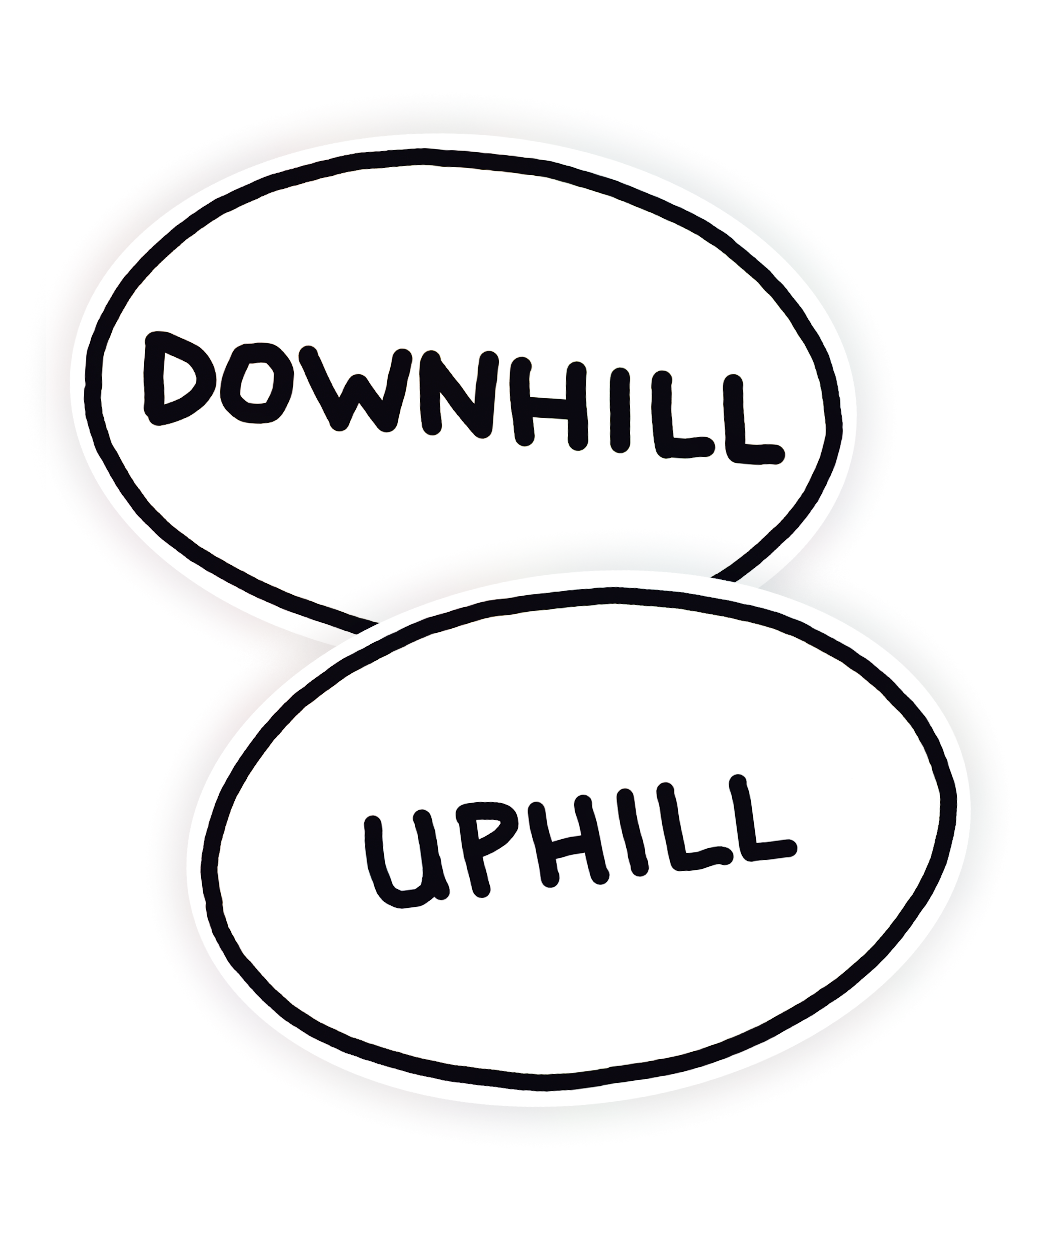 Two oval, white stickers with a black outline that read 